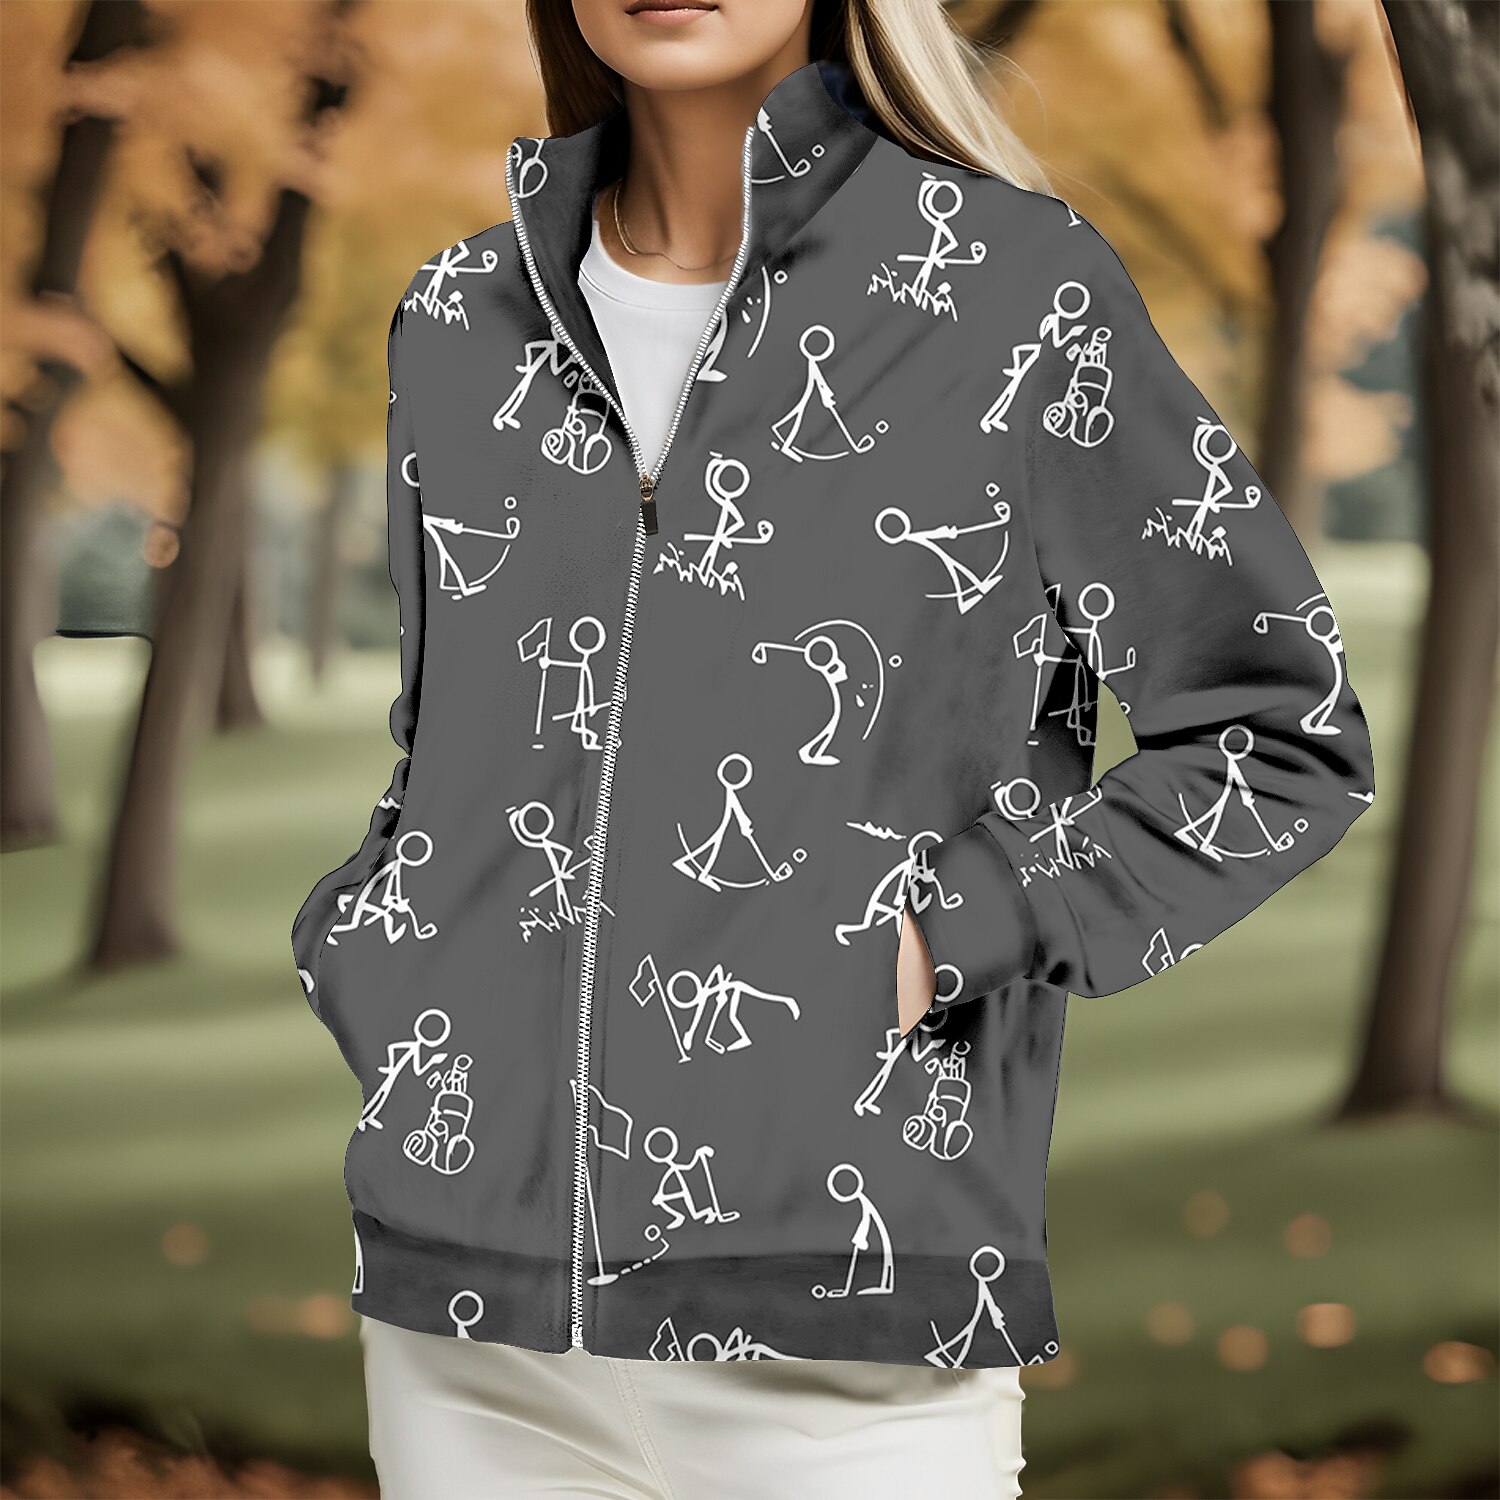 Women's Golf Hoodie Golf Pullover Golf Sweatshirt Thermal Warm Breathable Moisture Wicking Long Sleeve Golf Outerwear Top Regular Fit Side Pockets Full Zip Funny Printed Spring Autumn Tennis Golf 2023 - € 27.99 –P7